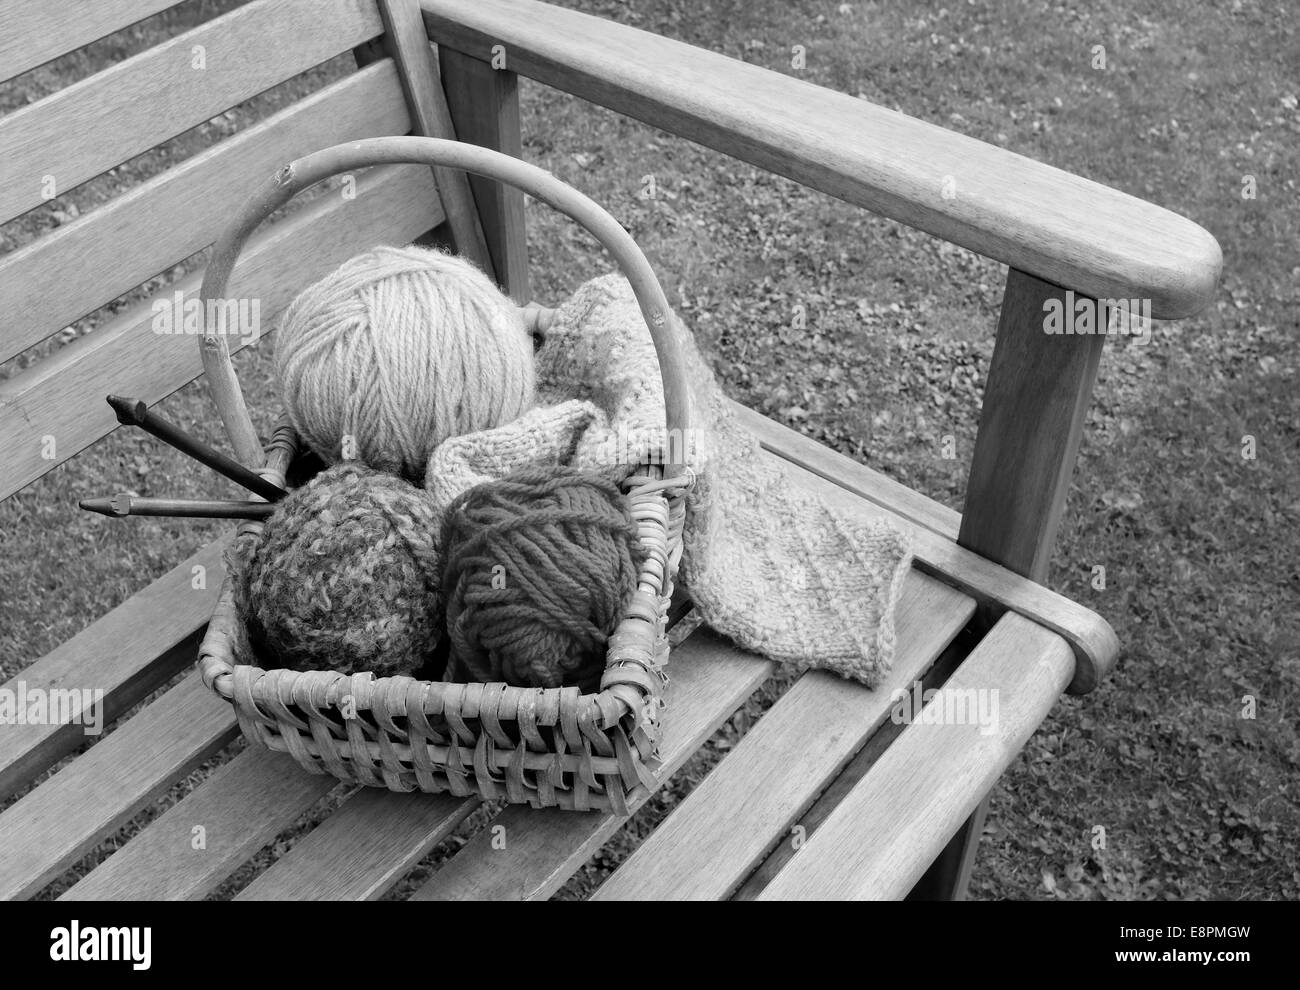 Craft basket of patterned knitting, balls of wool and wooden needles on a garden bench - monochrome processing Stock Photo